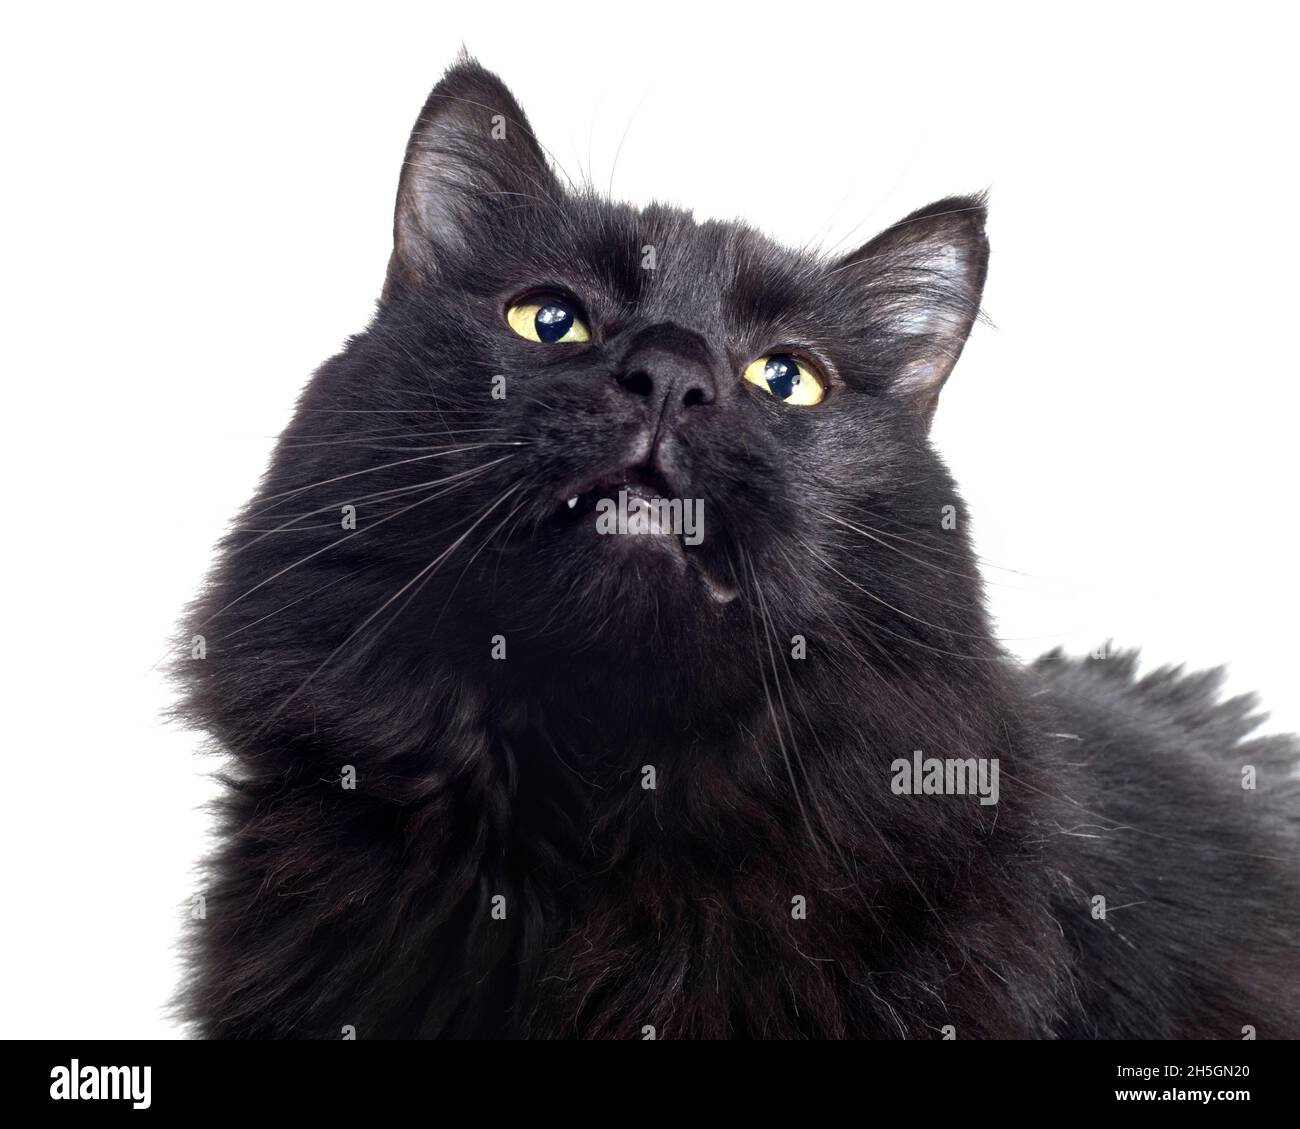 Sweet portrait of a long haired black cat. Stock Photo